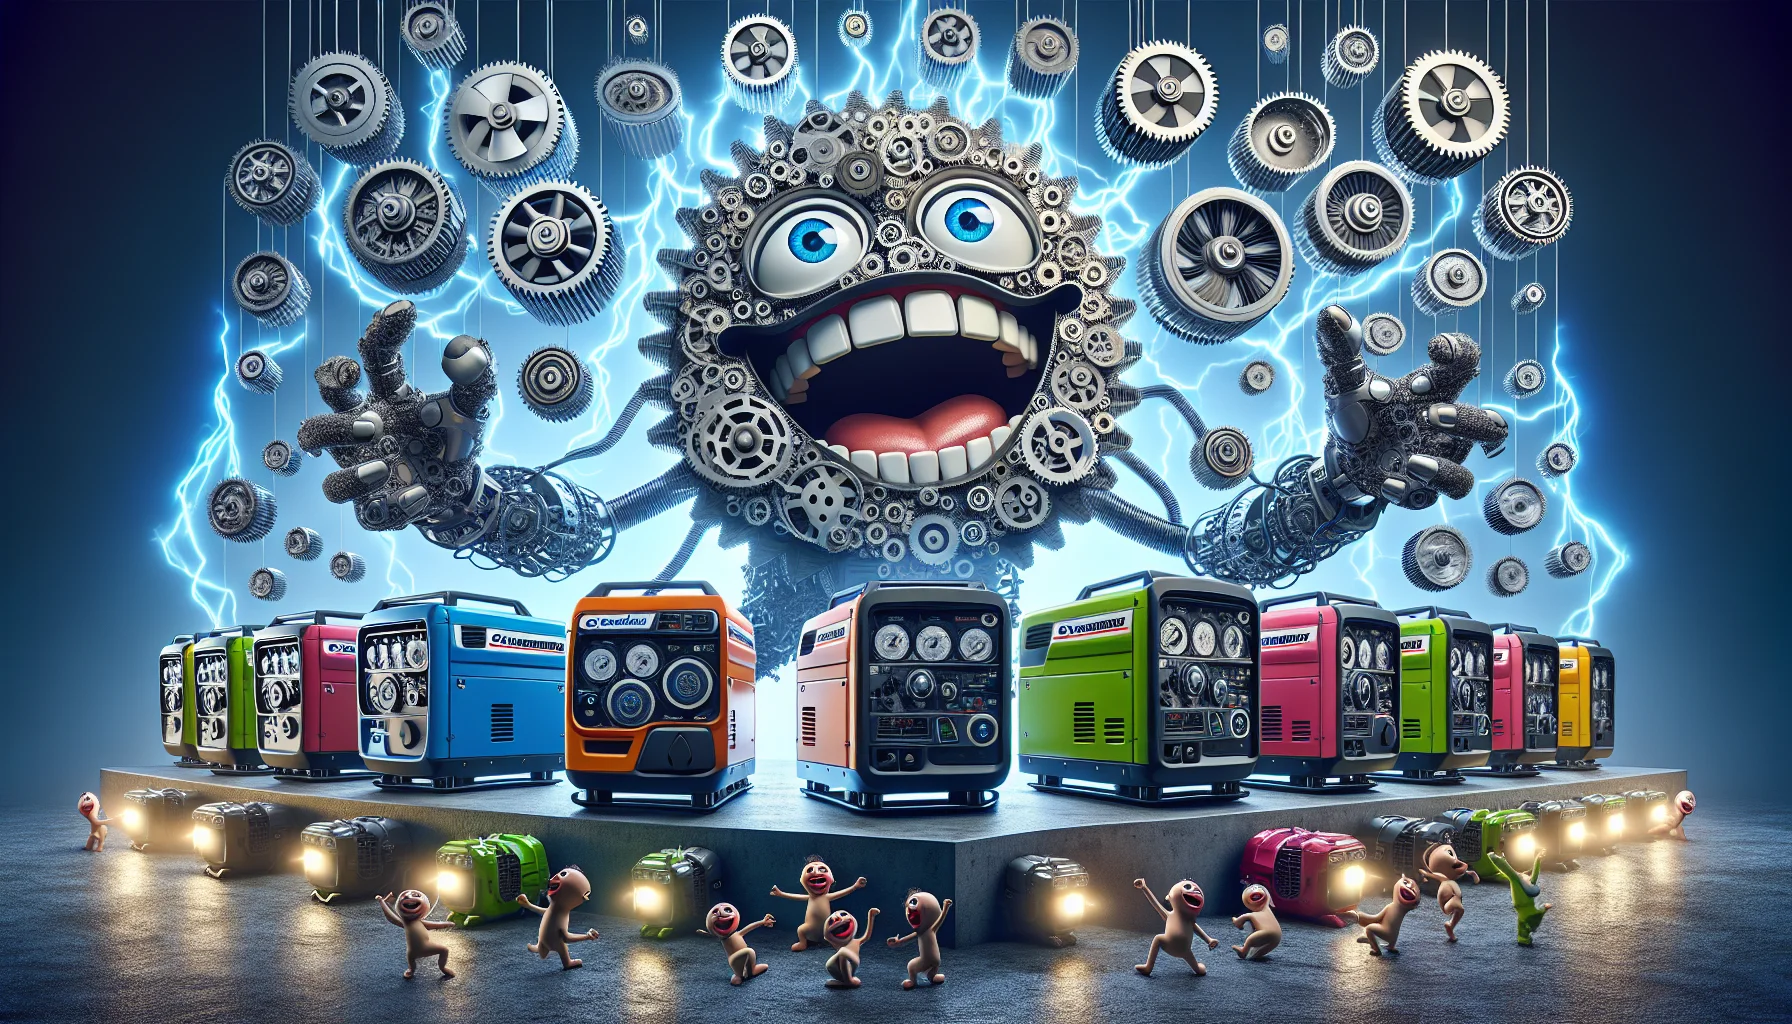 Imagine a humorous scene where a large and funky cartoon character, made entirely of cogs and gears, enthusiastically shows off a series of different Onan Generators. The cartoon character is exuberantly playing the role of a salesperson, using over-the-top techniques to capture the viewer's attention. The generators are stylized, in bright colors, and seem to create electricity with such dazzling brightness and power that they create a disco-like atmosphere. A few smaller characters are seen dancing in the generated lights, all with excited and amazed expressions. The image juxtaposes the technicalities with laughter and joy invoking the idea of electricity generation as amusing and fun.